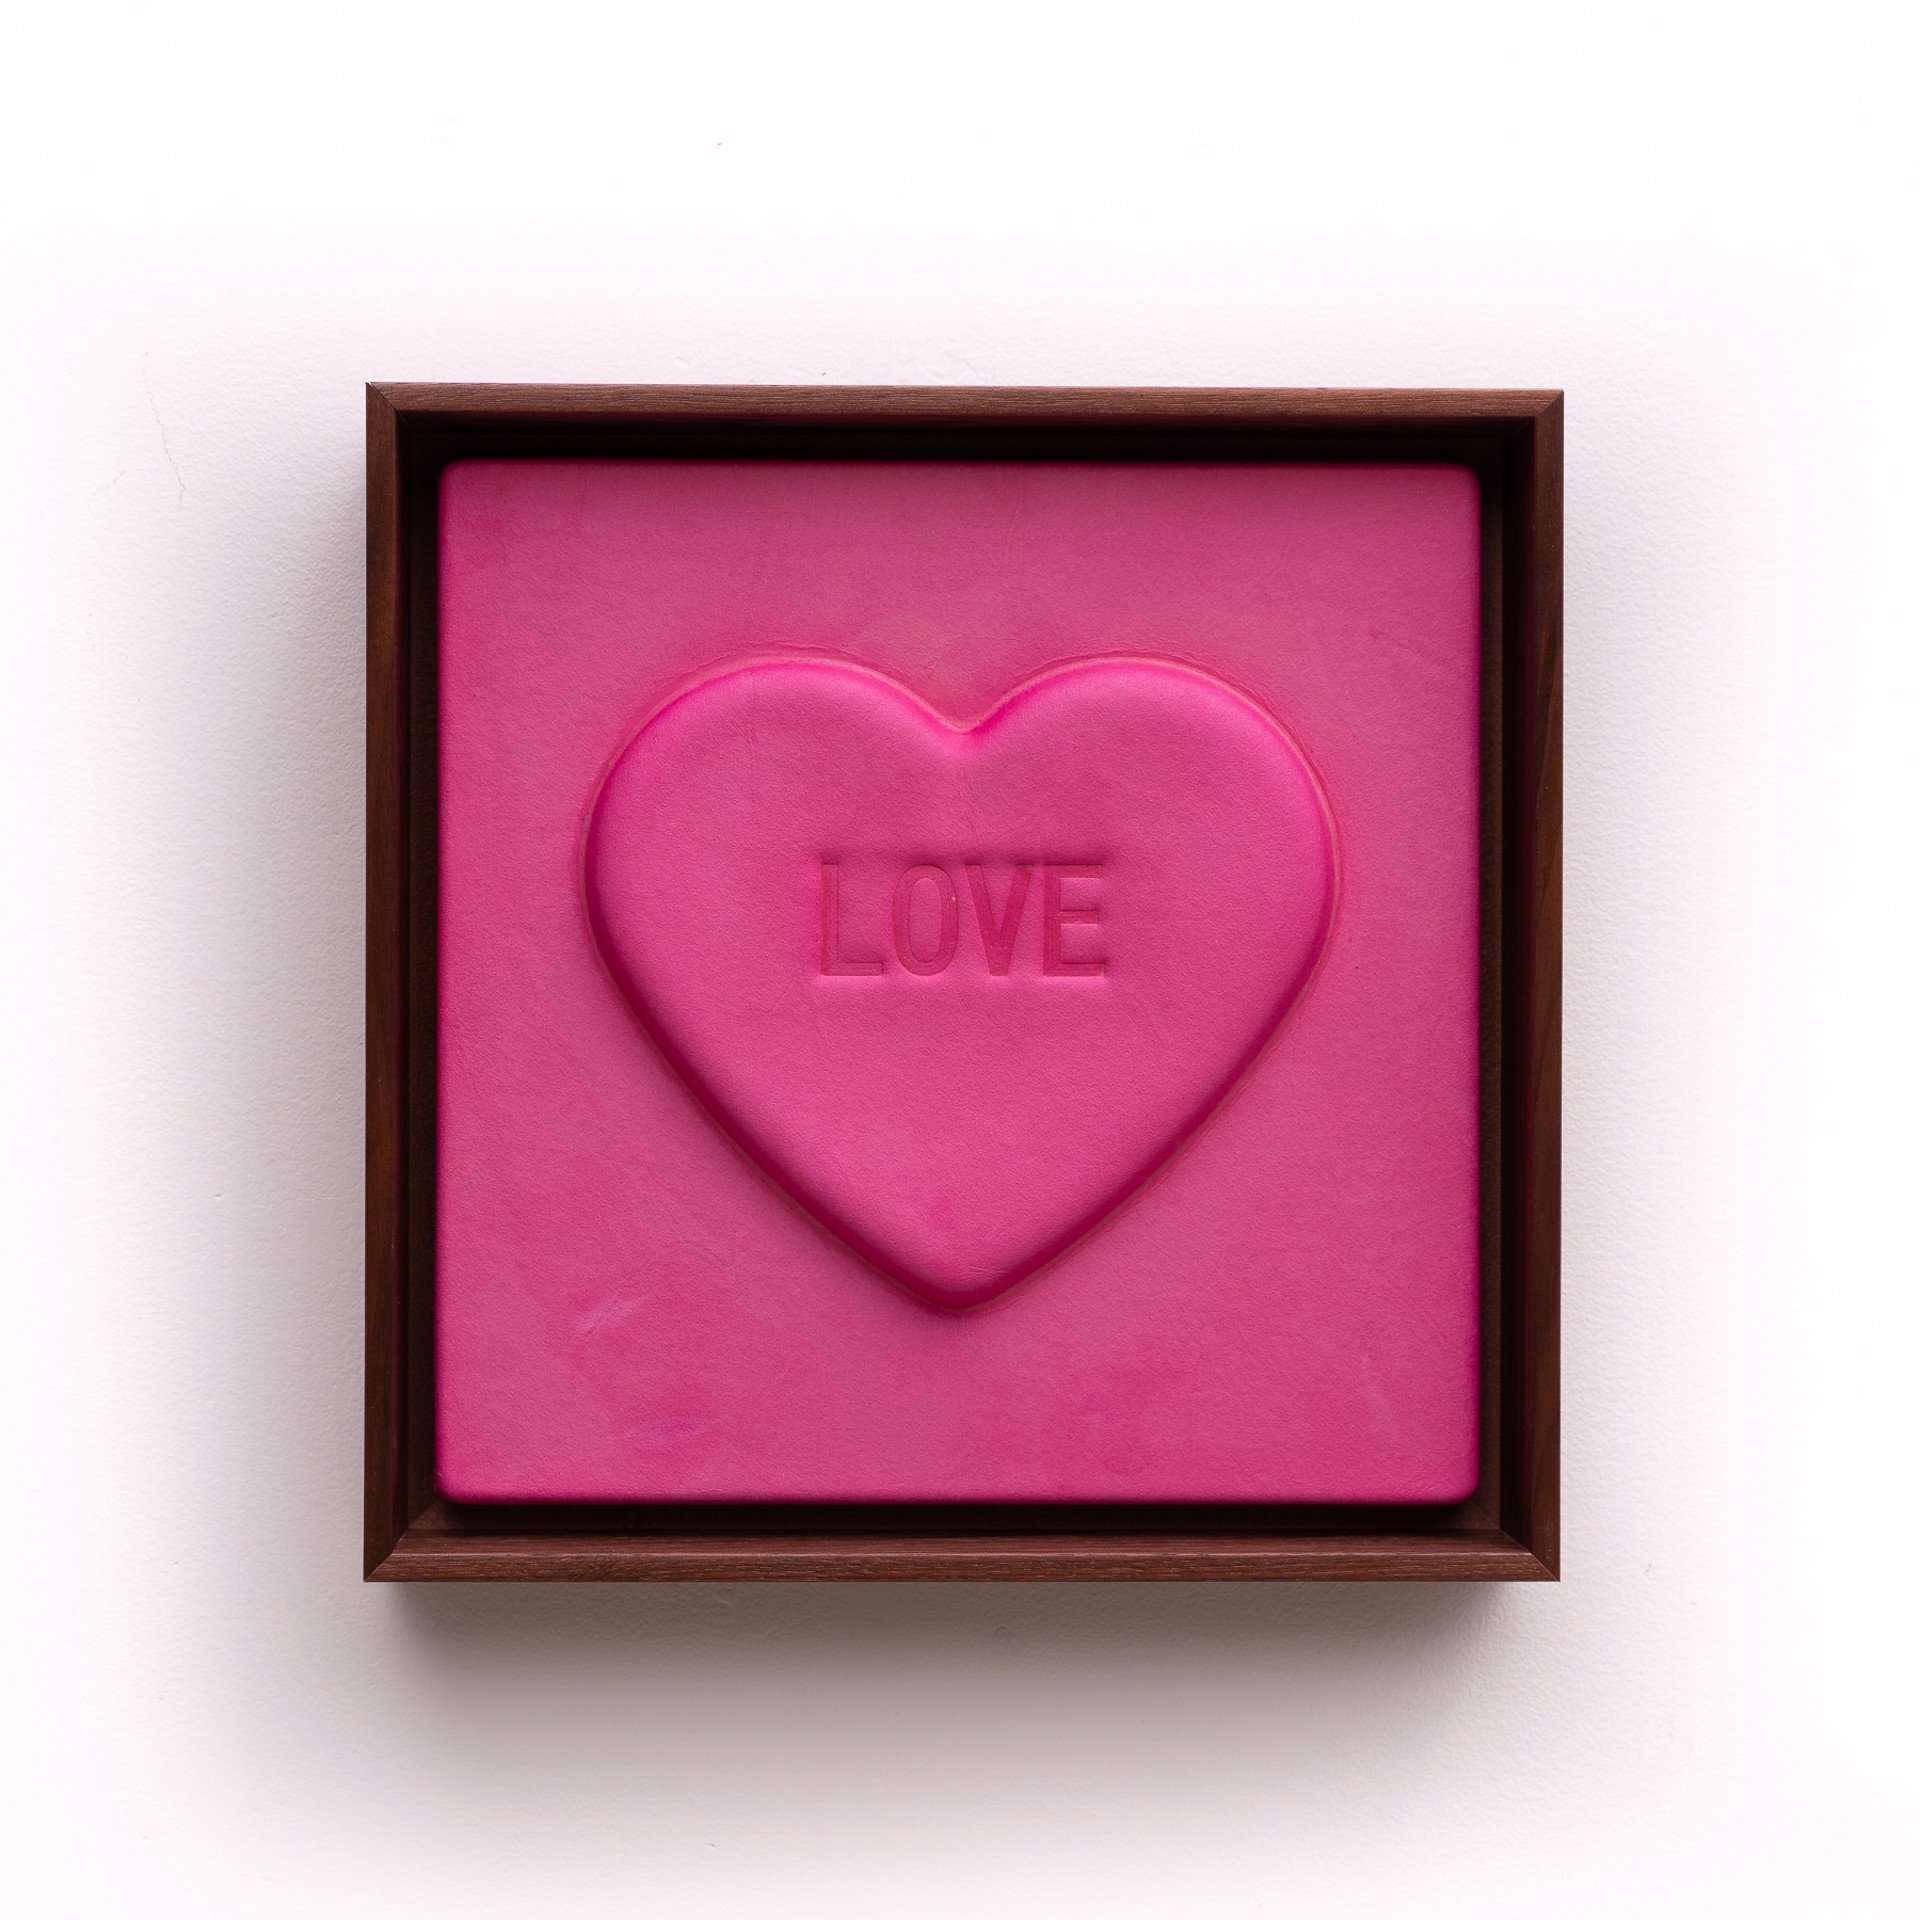 'LOVE' - Sweetheart series by Mx. Hyde